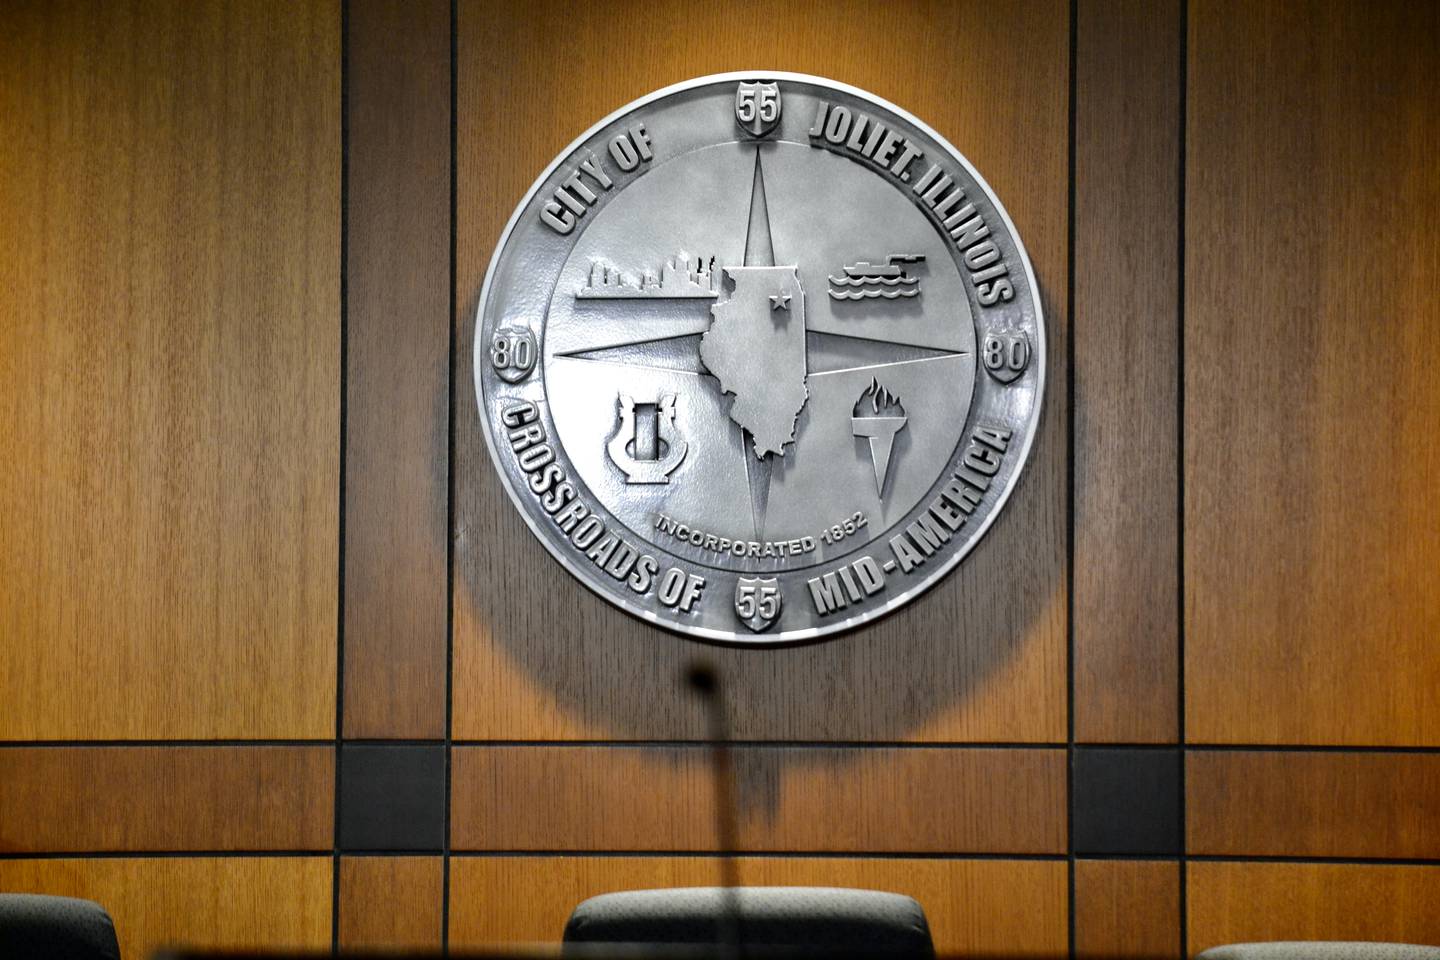 The city of Joliet's seal can be seen in the council chambers at City Hall on Dec. 6, 2021